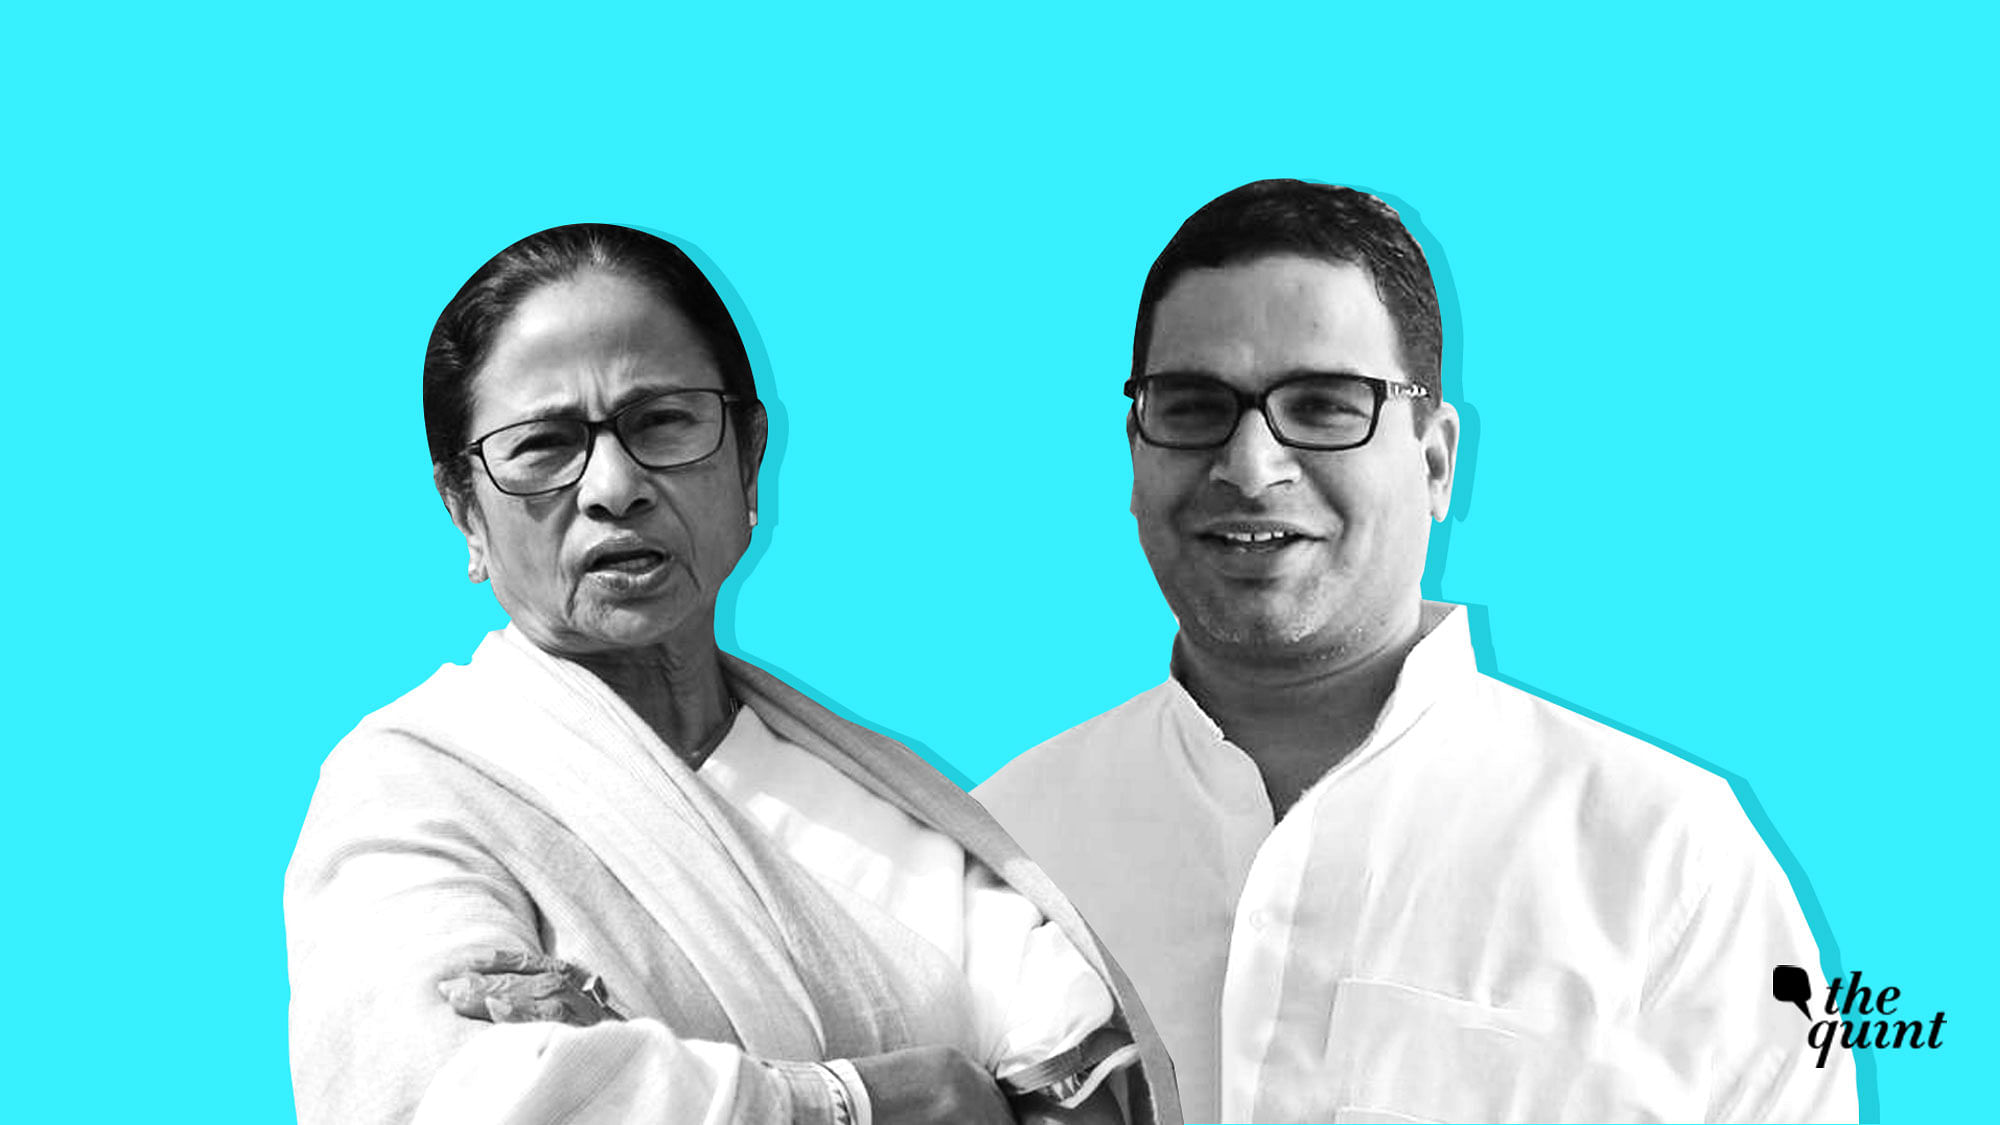 Mamata Banerjee has signed on election strategist Prashant Kishor to work with the Trinamool Congress till the 2021 state elections in West Bengal.